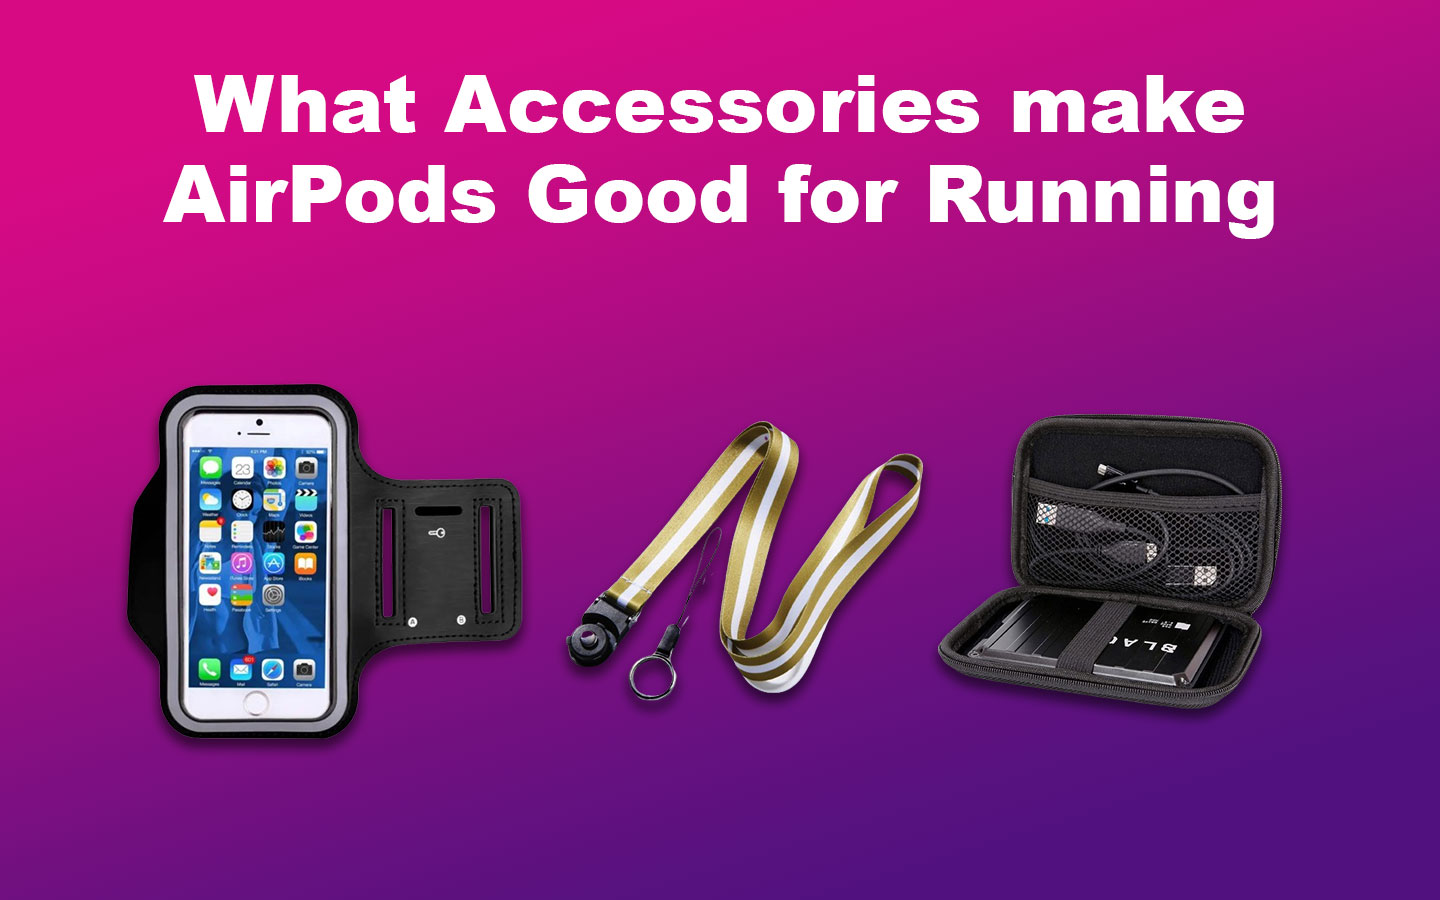 What Accessories make AirPods Good for Running